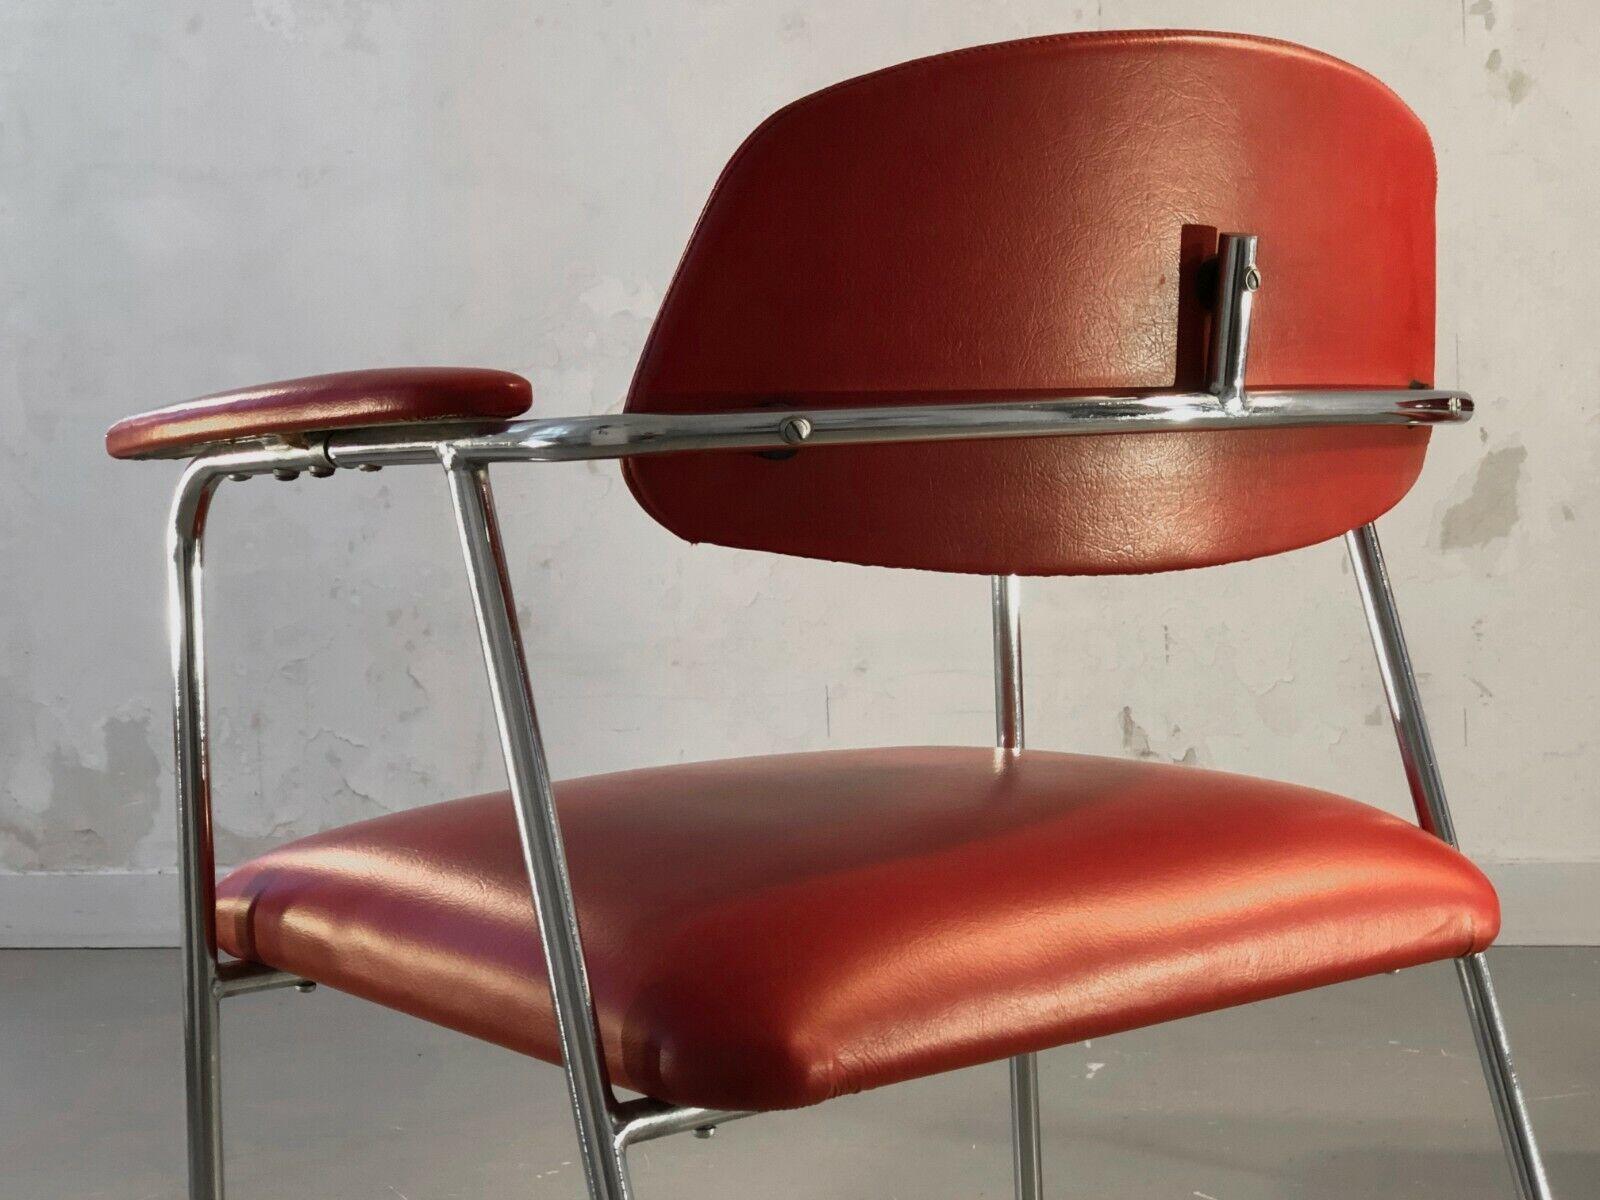 2 MID-CENTURY-MODERN MODERNIST CHAIRS by PIERRE PAULIN, STEINER, France 1950 For Sale 3